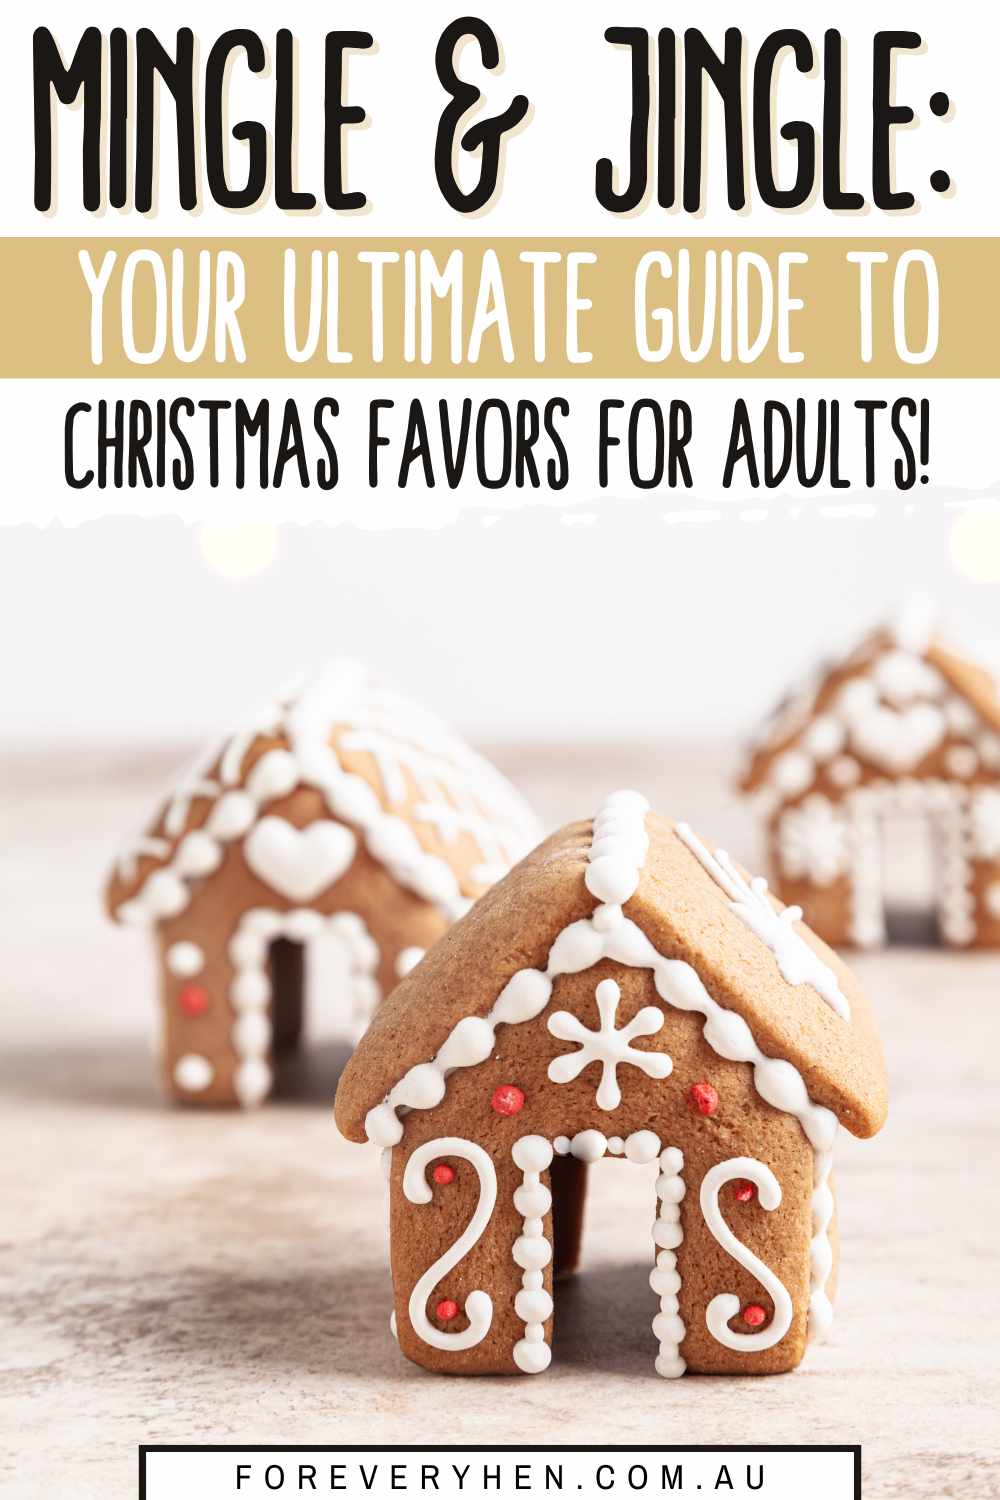 Mingle & Jingle: Your ultimate guide to Christmas favors for adults Pinterest pin